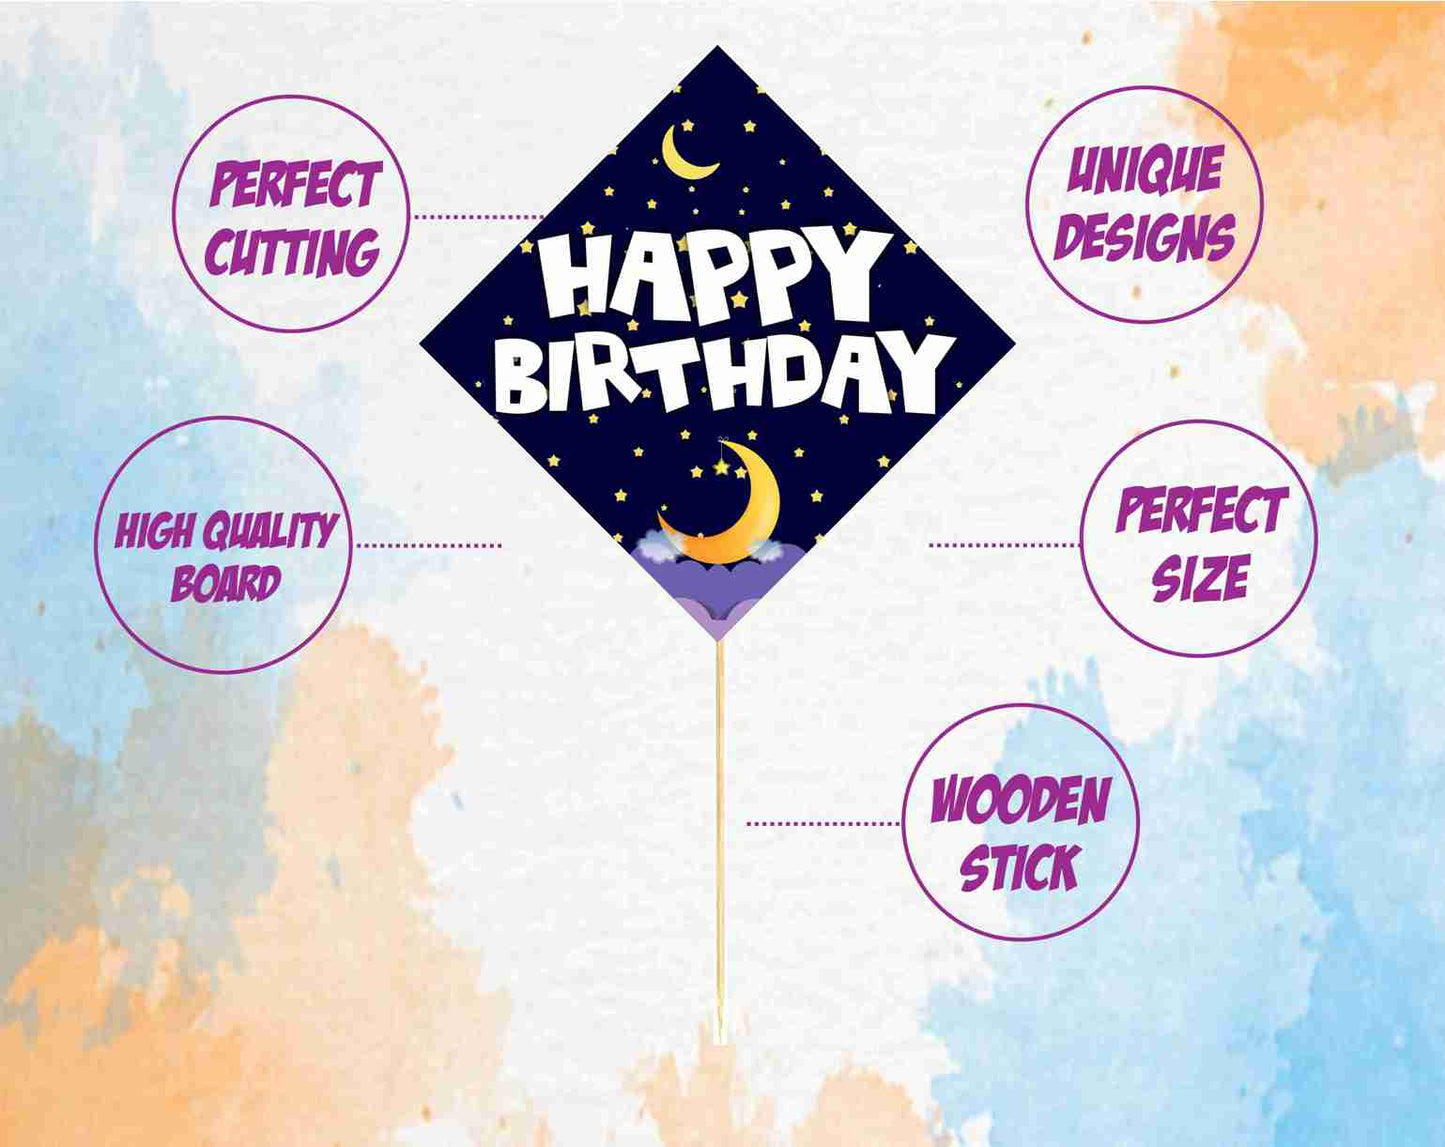 Moon and Stars Birthday Photo Booth Party Props Theme Birthday Party Decoration, Birthday Photo Booth Party Item for Adults and Kids